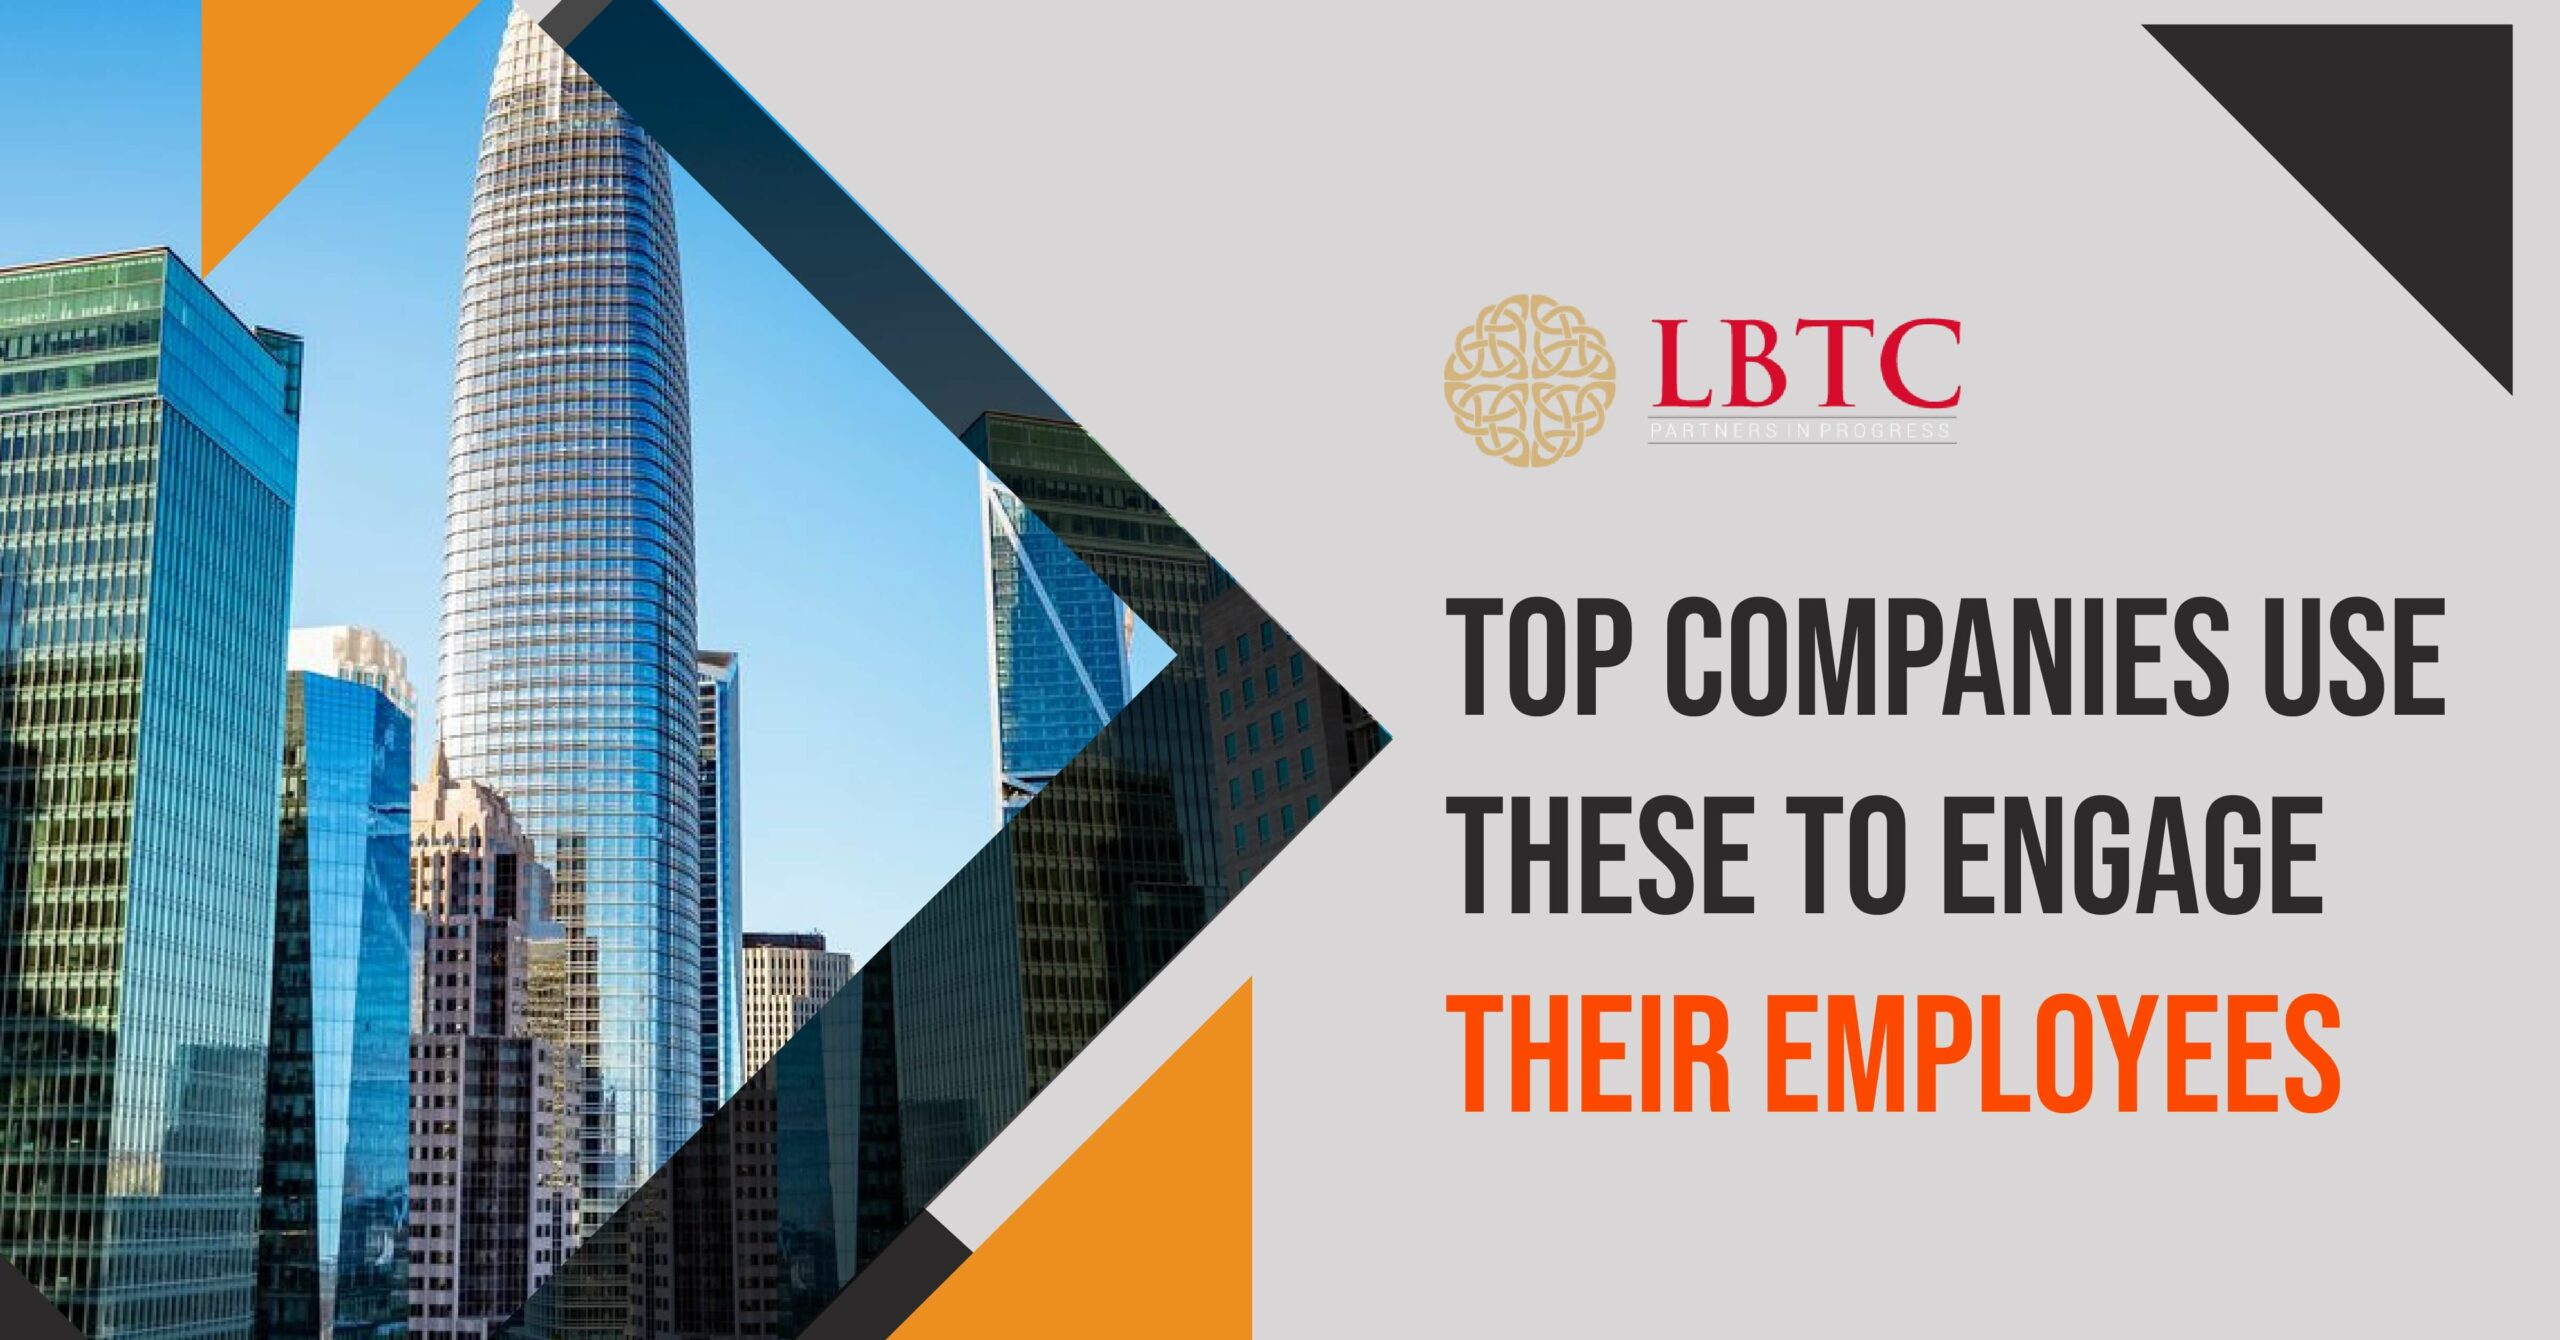 Top companies use these to engage their employees